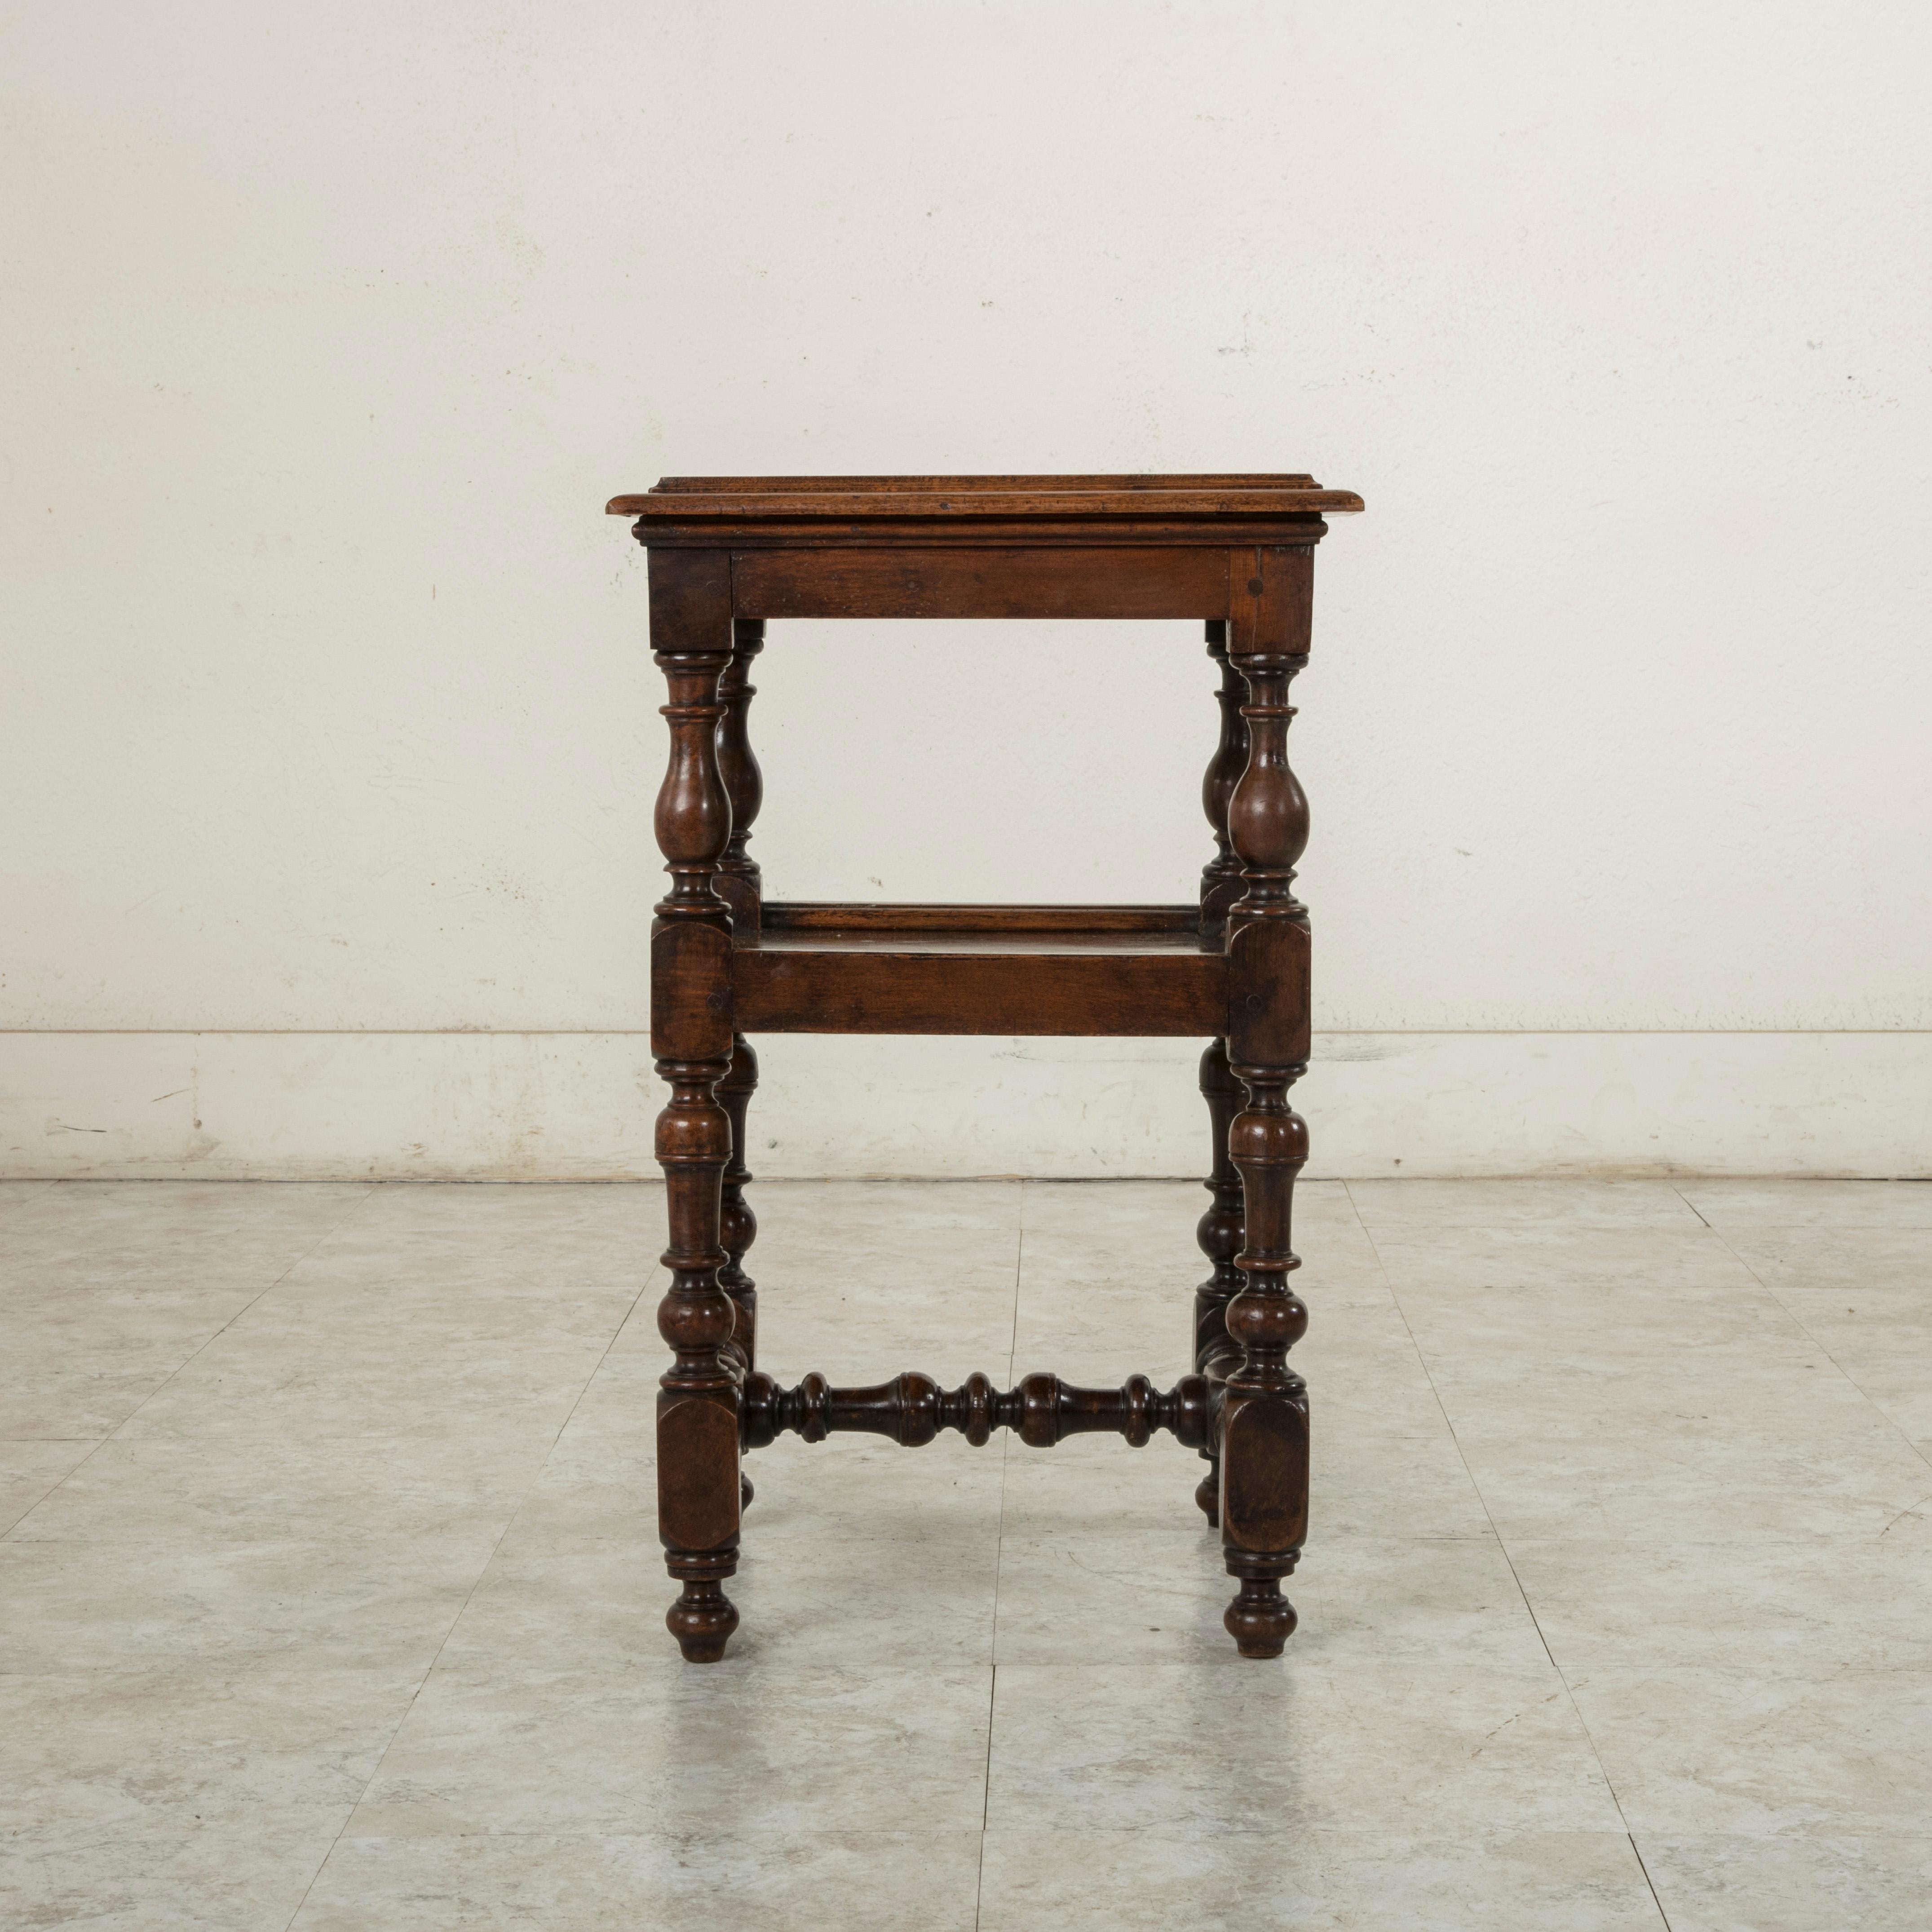 This early 19th century French Louis XIII style walnut side table features hand pegged construction and a beveled top. A lower shelf provides additional display space. Its turned legs are joined at the base by an H-stretcher, circa 1800.